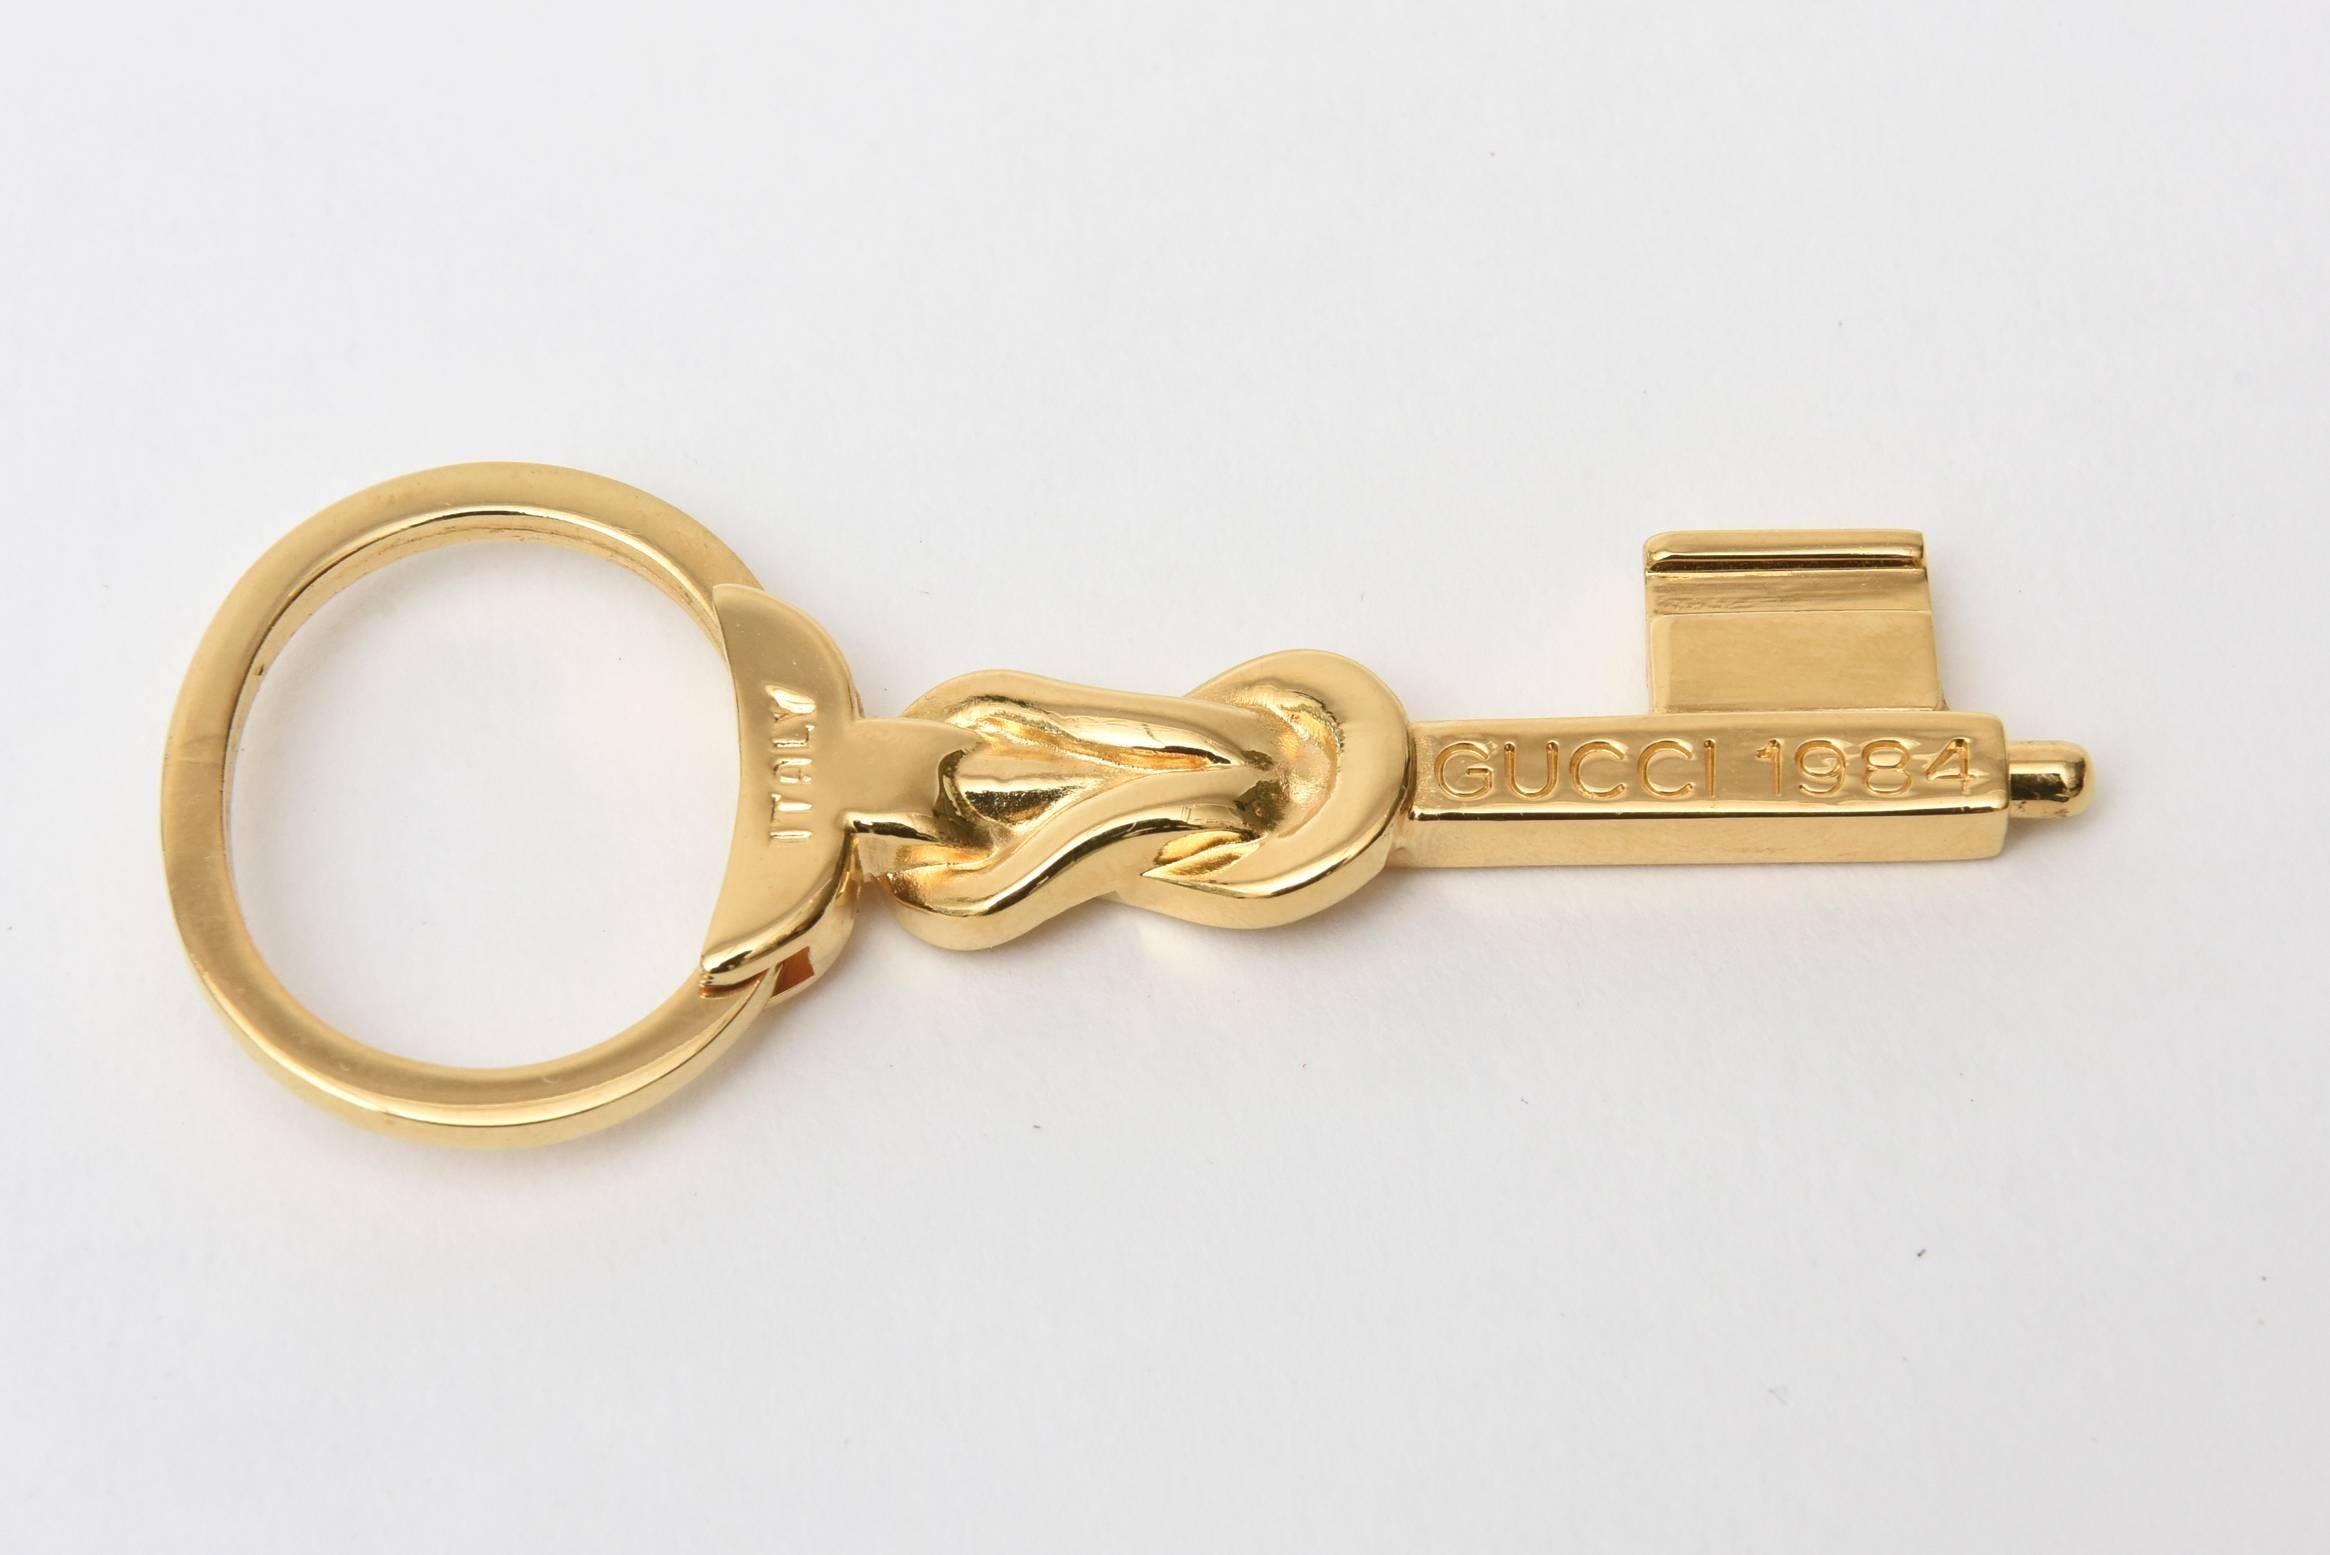 Signed Italian Gucci Gold-Plated Key Chain 2